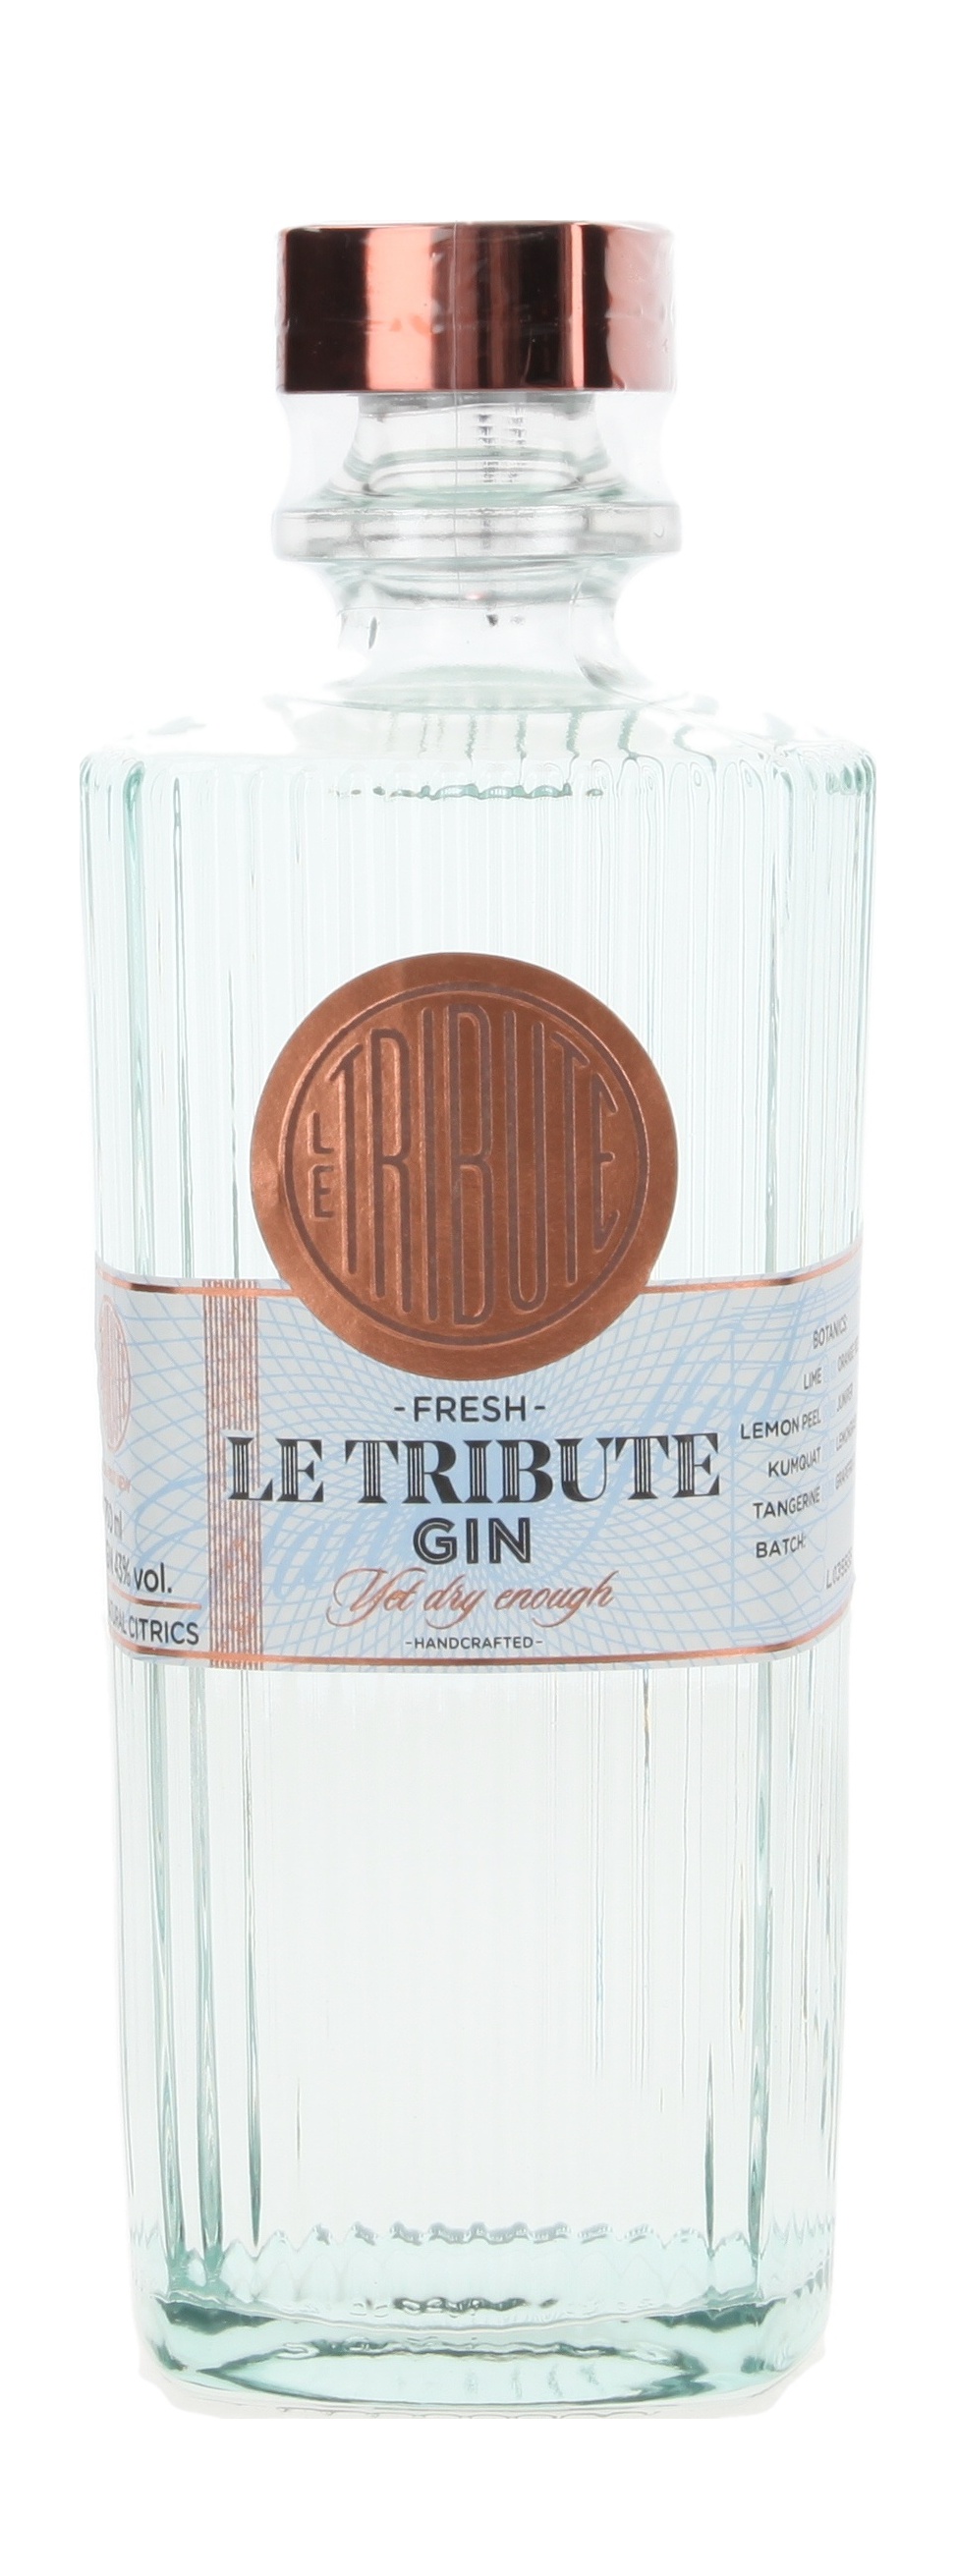 Le Tribute Dry Gin